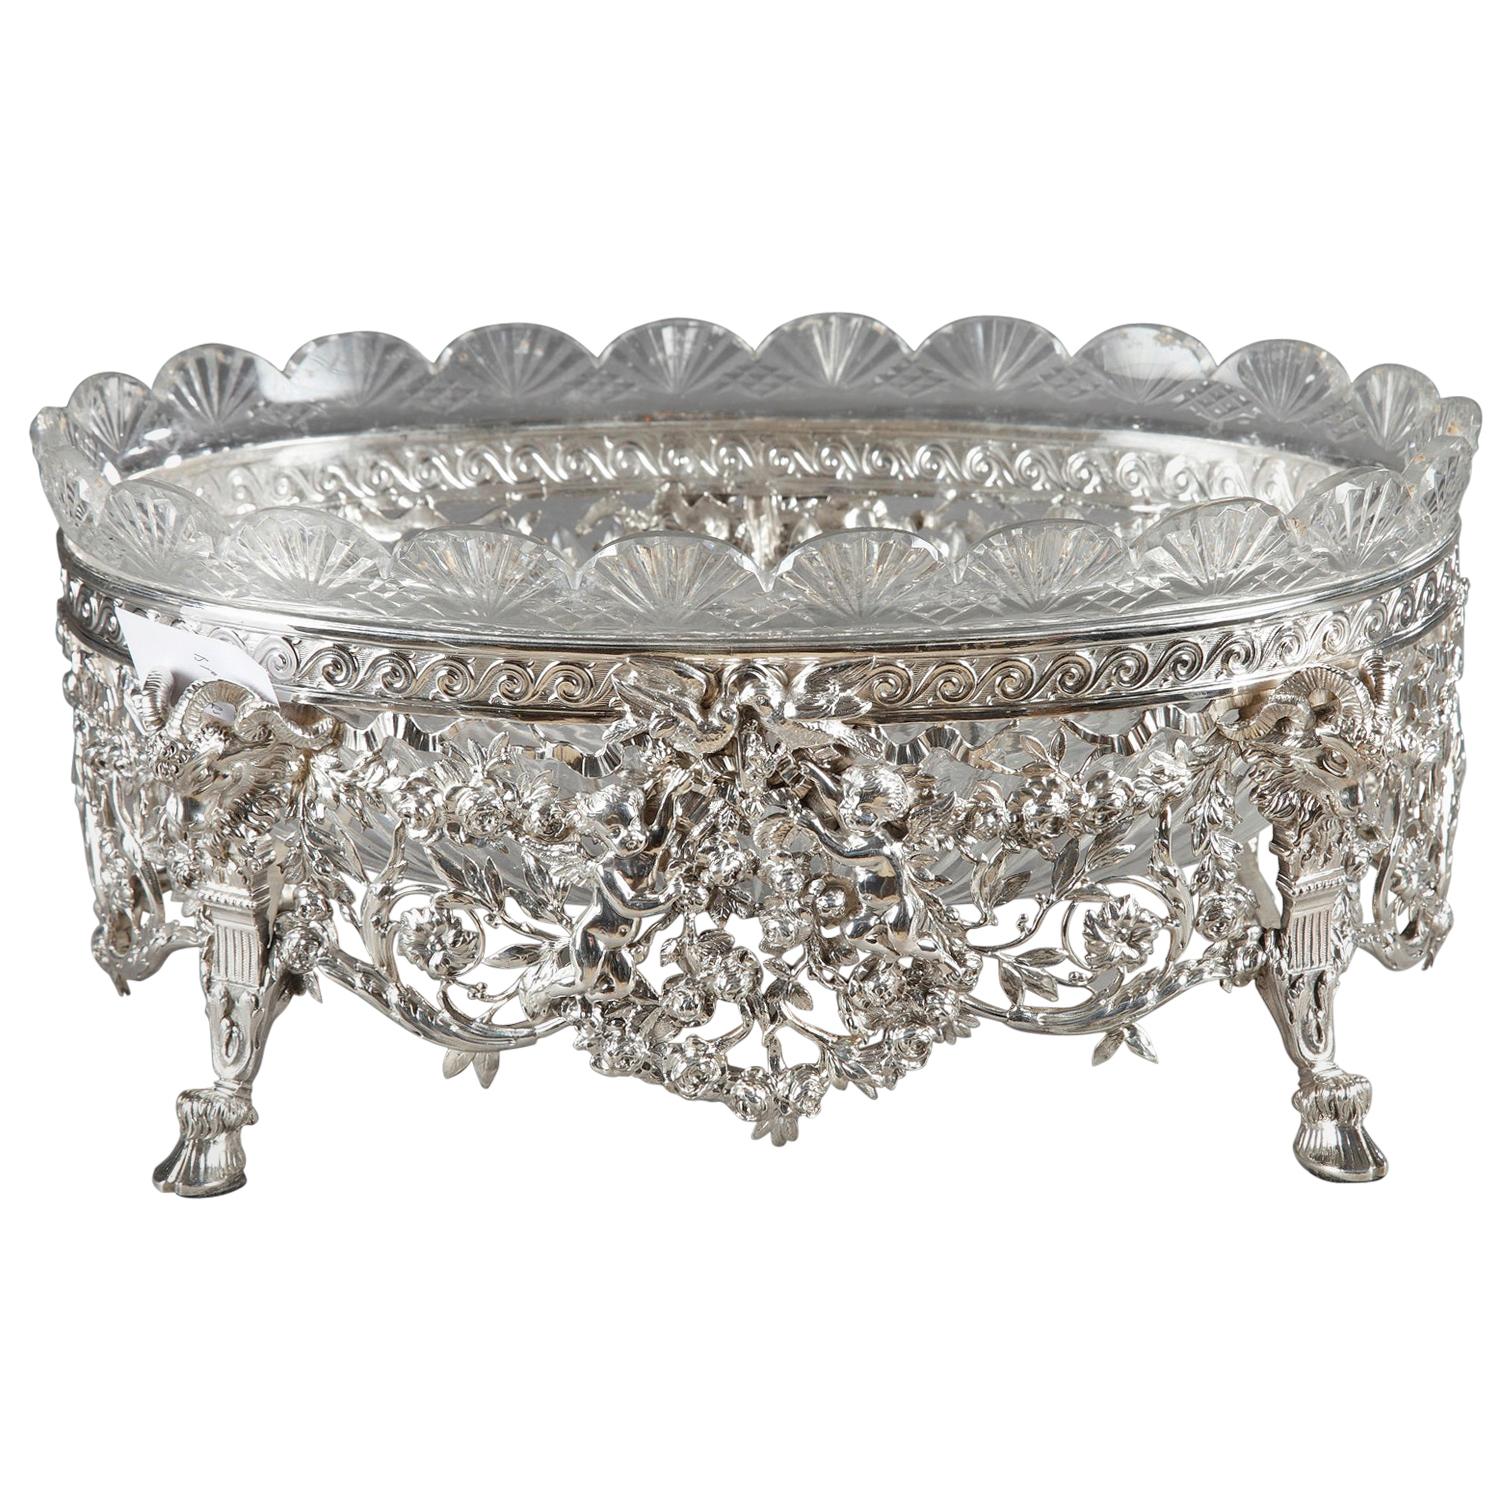 19th Century Silver and Cut-Crystal Jardinière For Sale